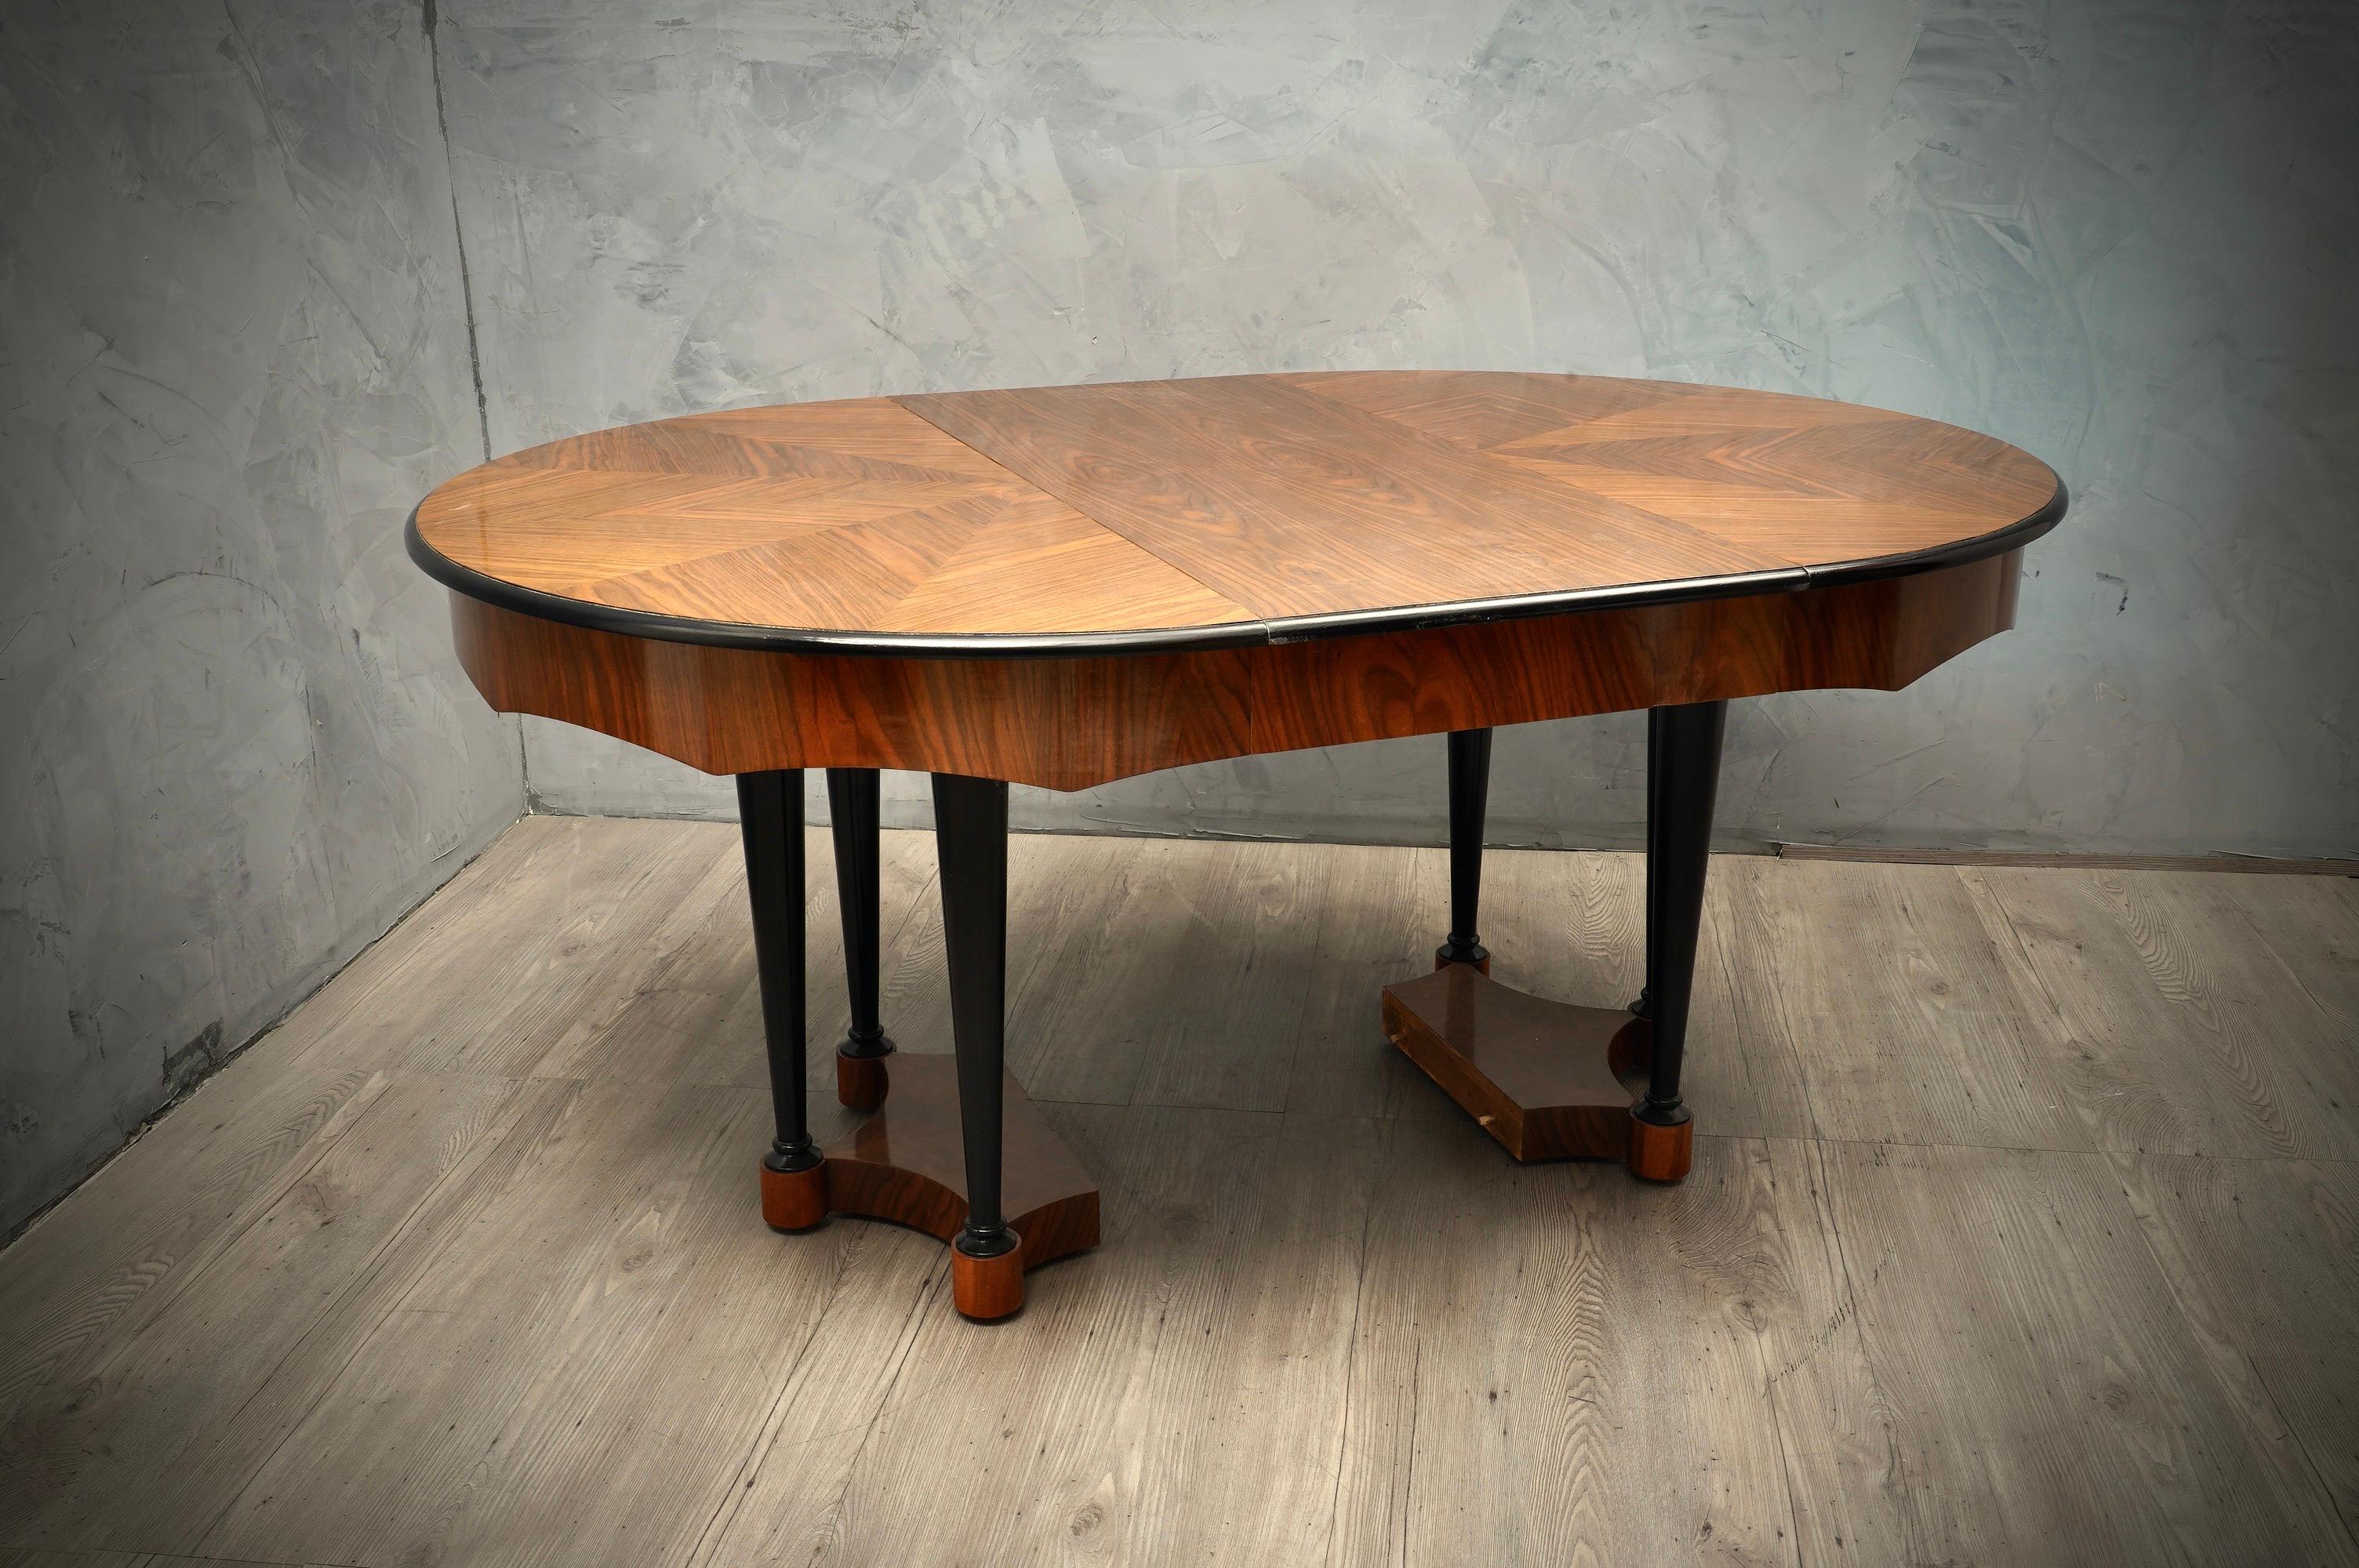 Extremely rare Biedermeier extendable table, all attention is focused on the beautiful patina of the walnut wood and the excellent craftsmanship. Note the band below on the table with its particular processing. Very very elegant.

The table is all